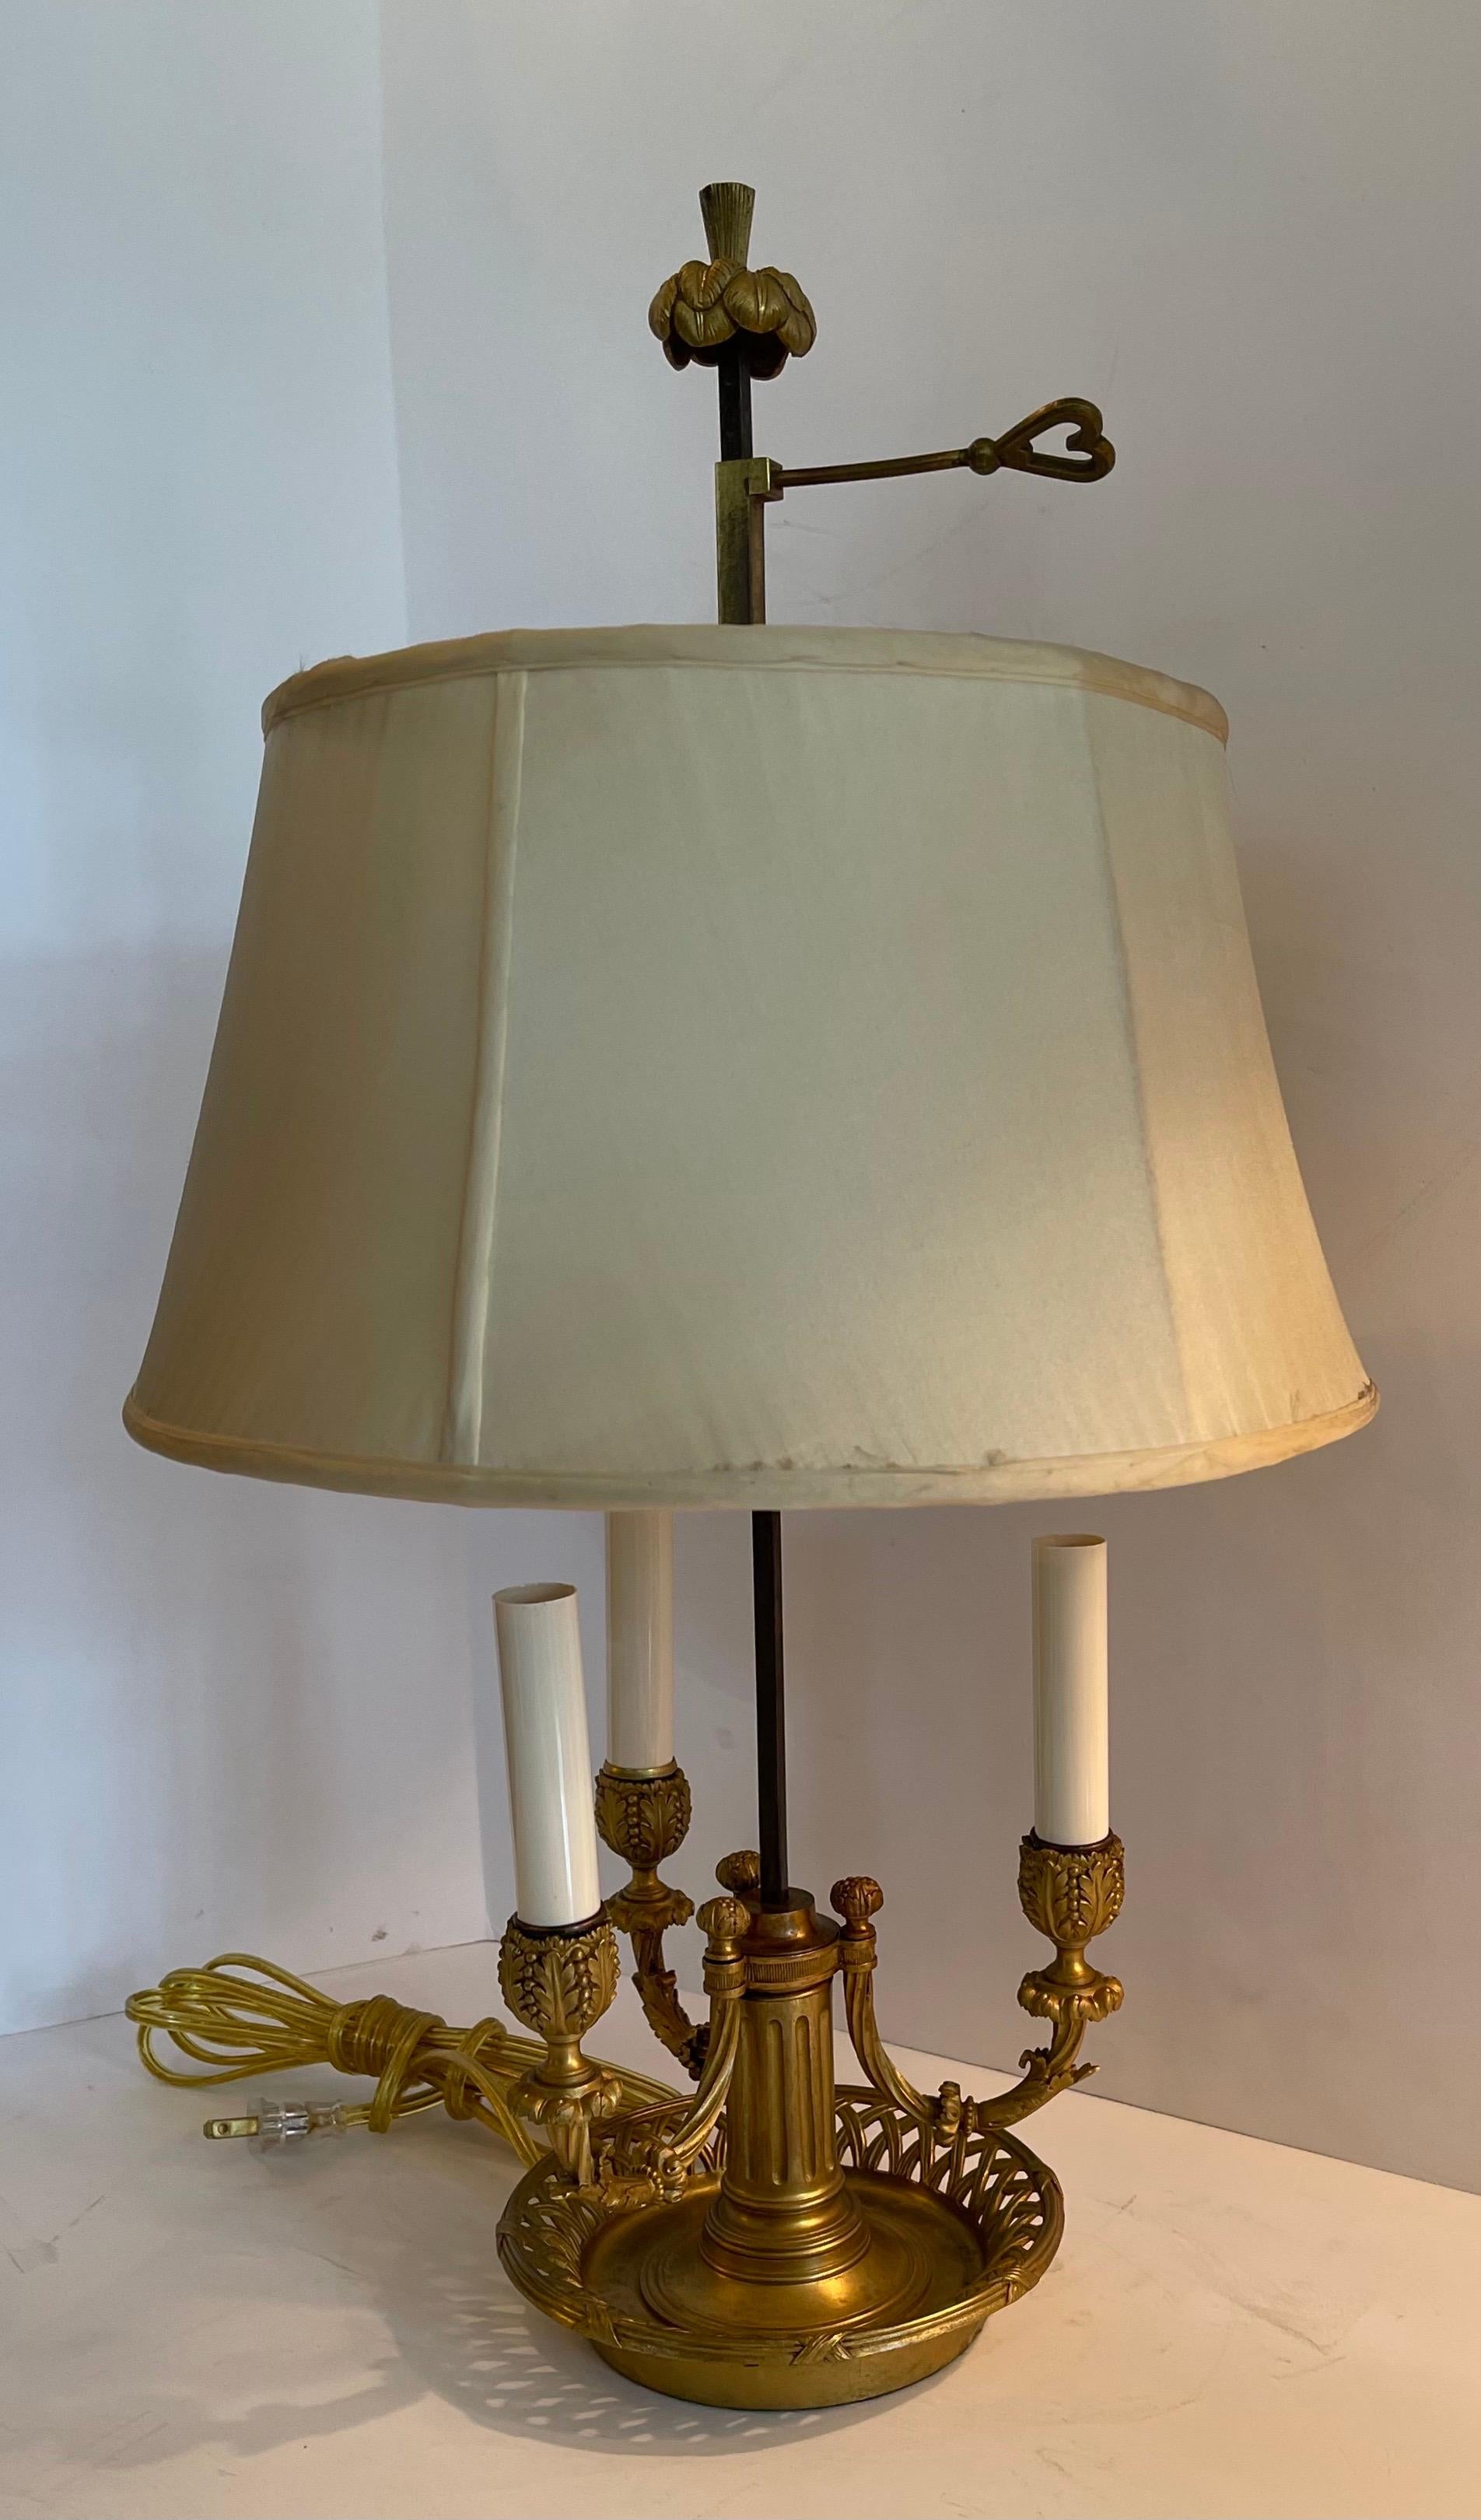 A wonderful French Empire / Neoclassical bronze three candelabras bouillotte lamp with silk shade.